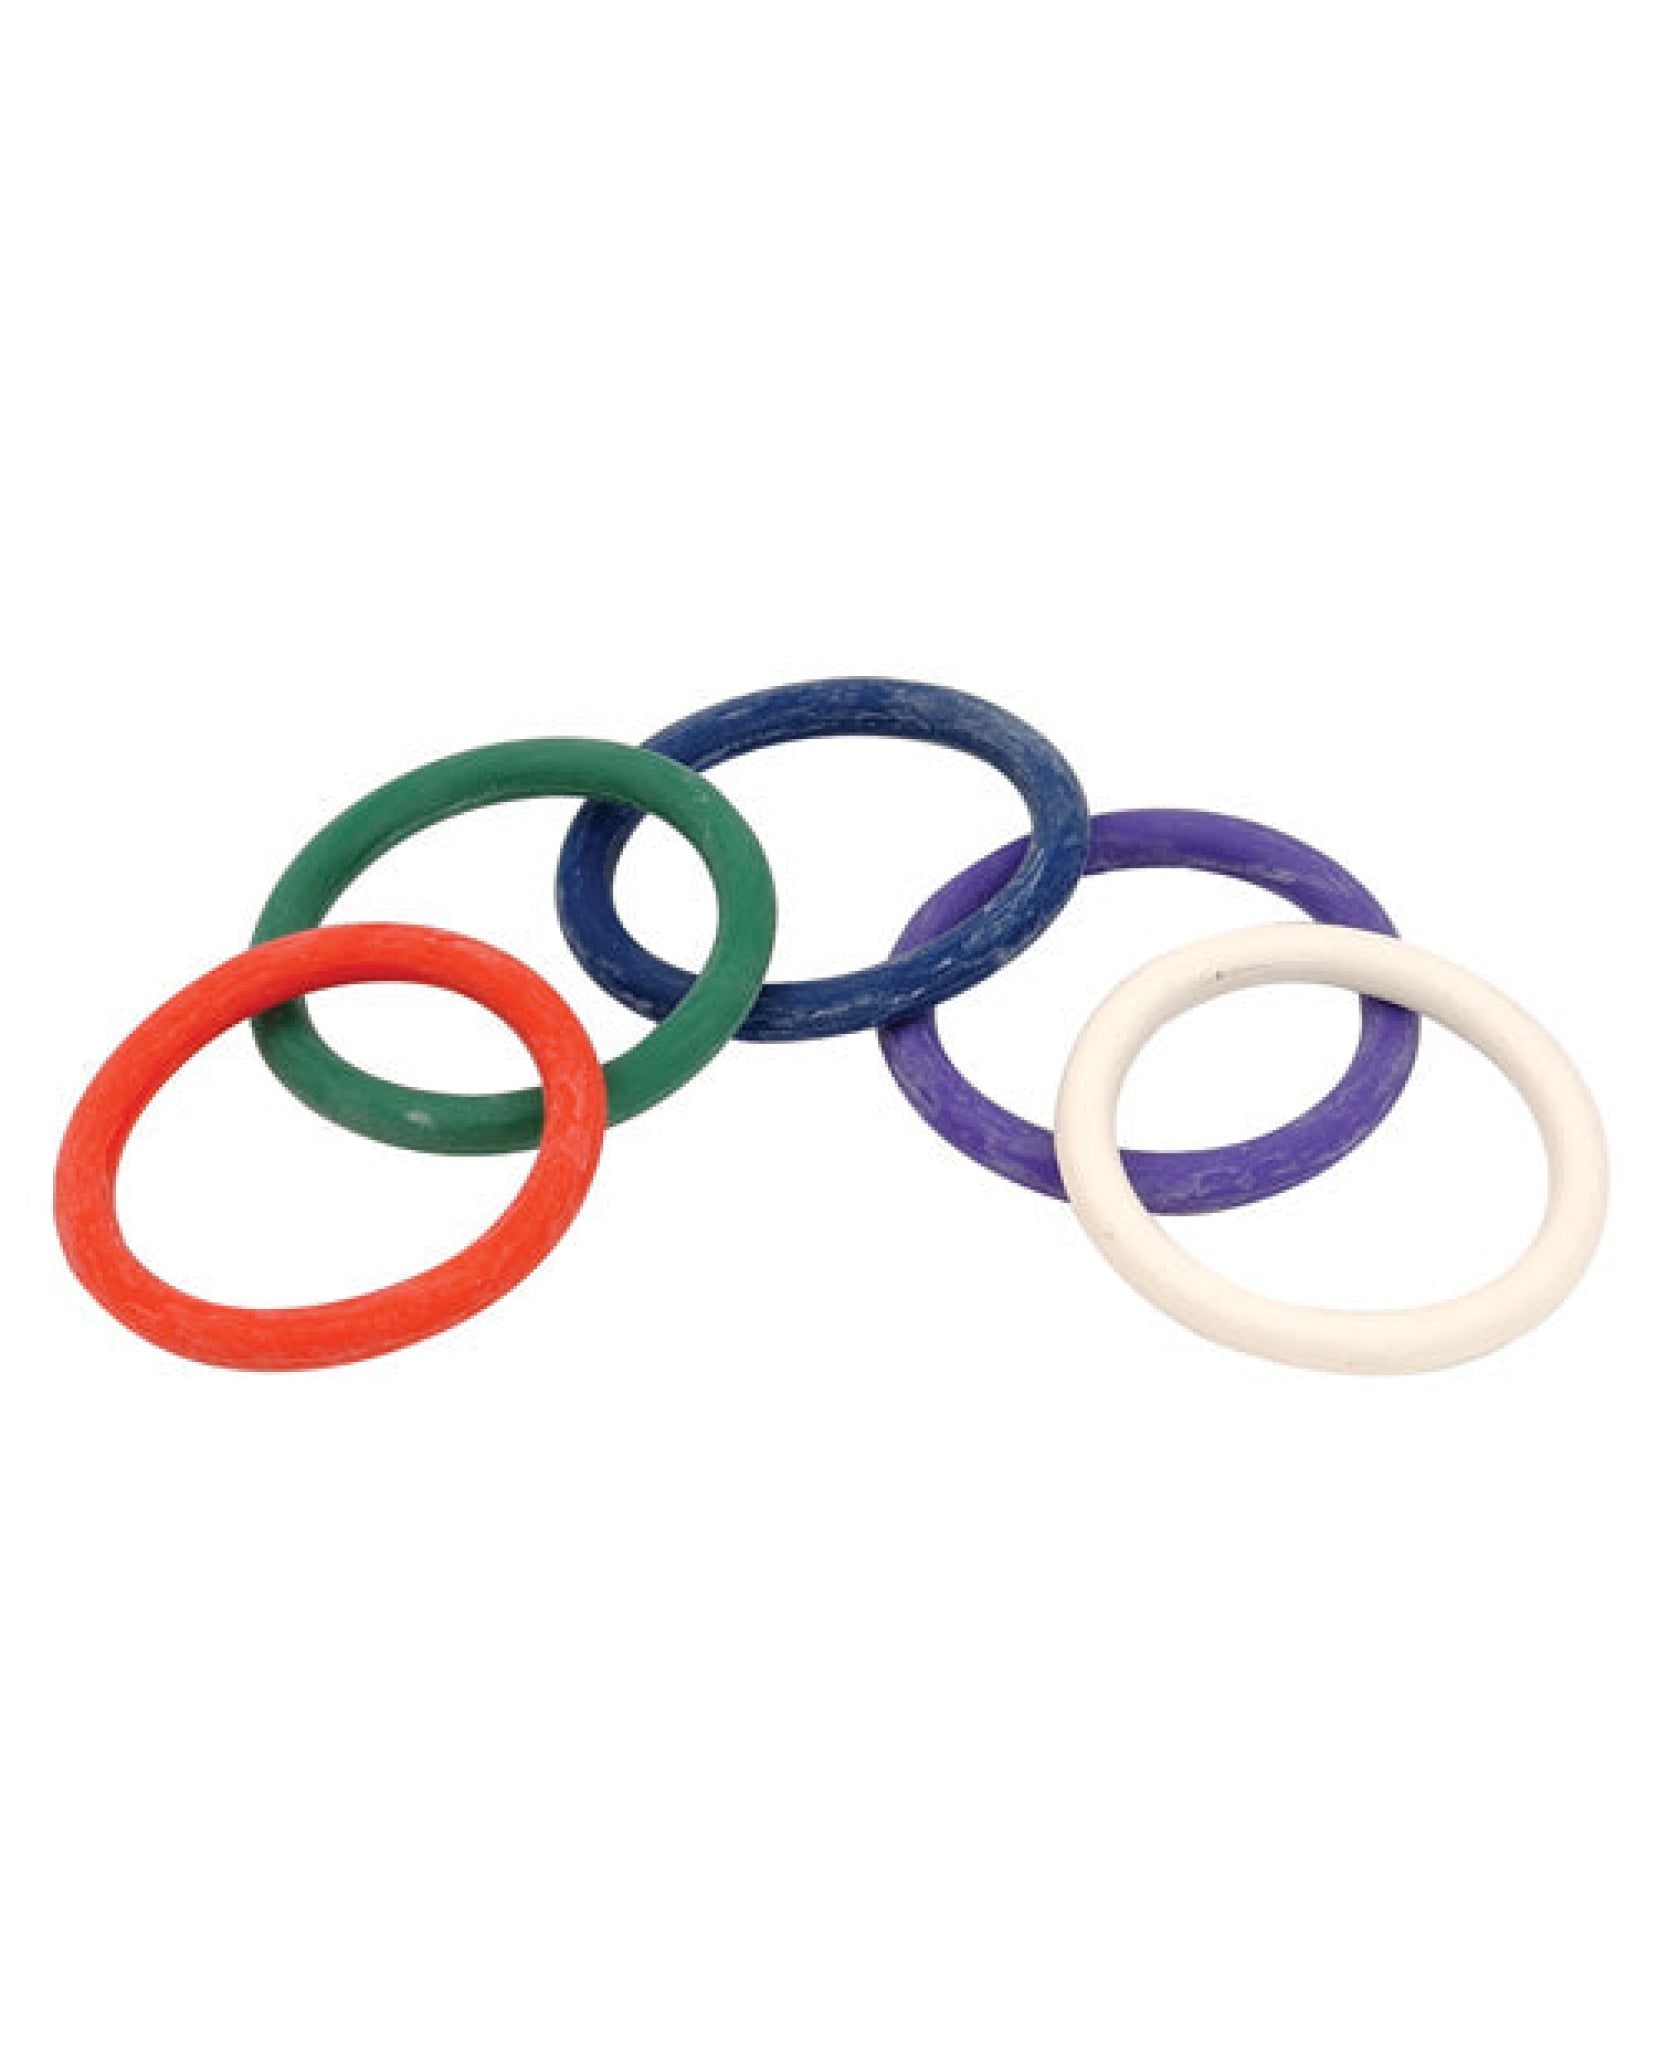 Spartacus 1.5" Rubber Cock Ring Set - Rainbow Pack Of 5 Spartacus